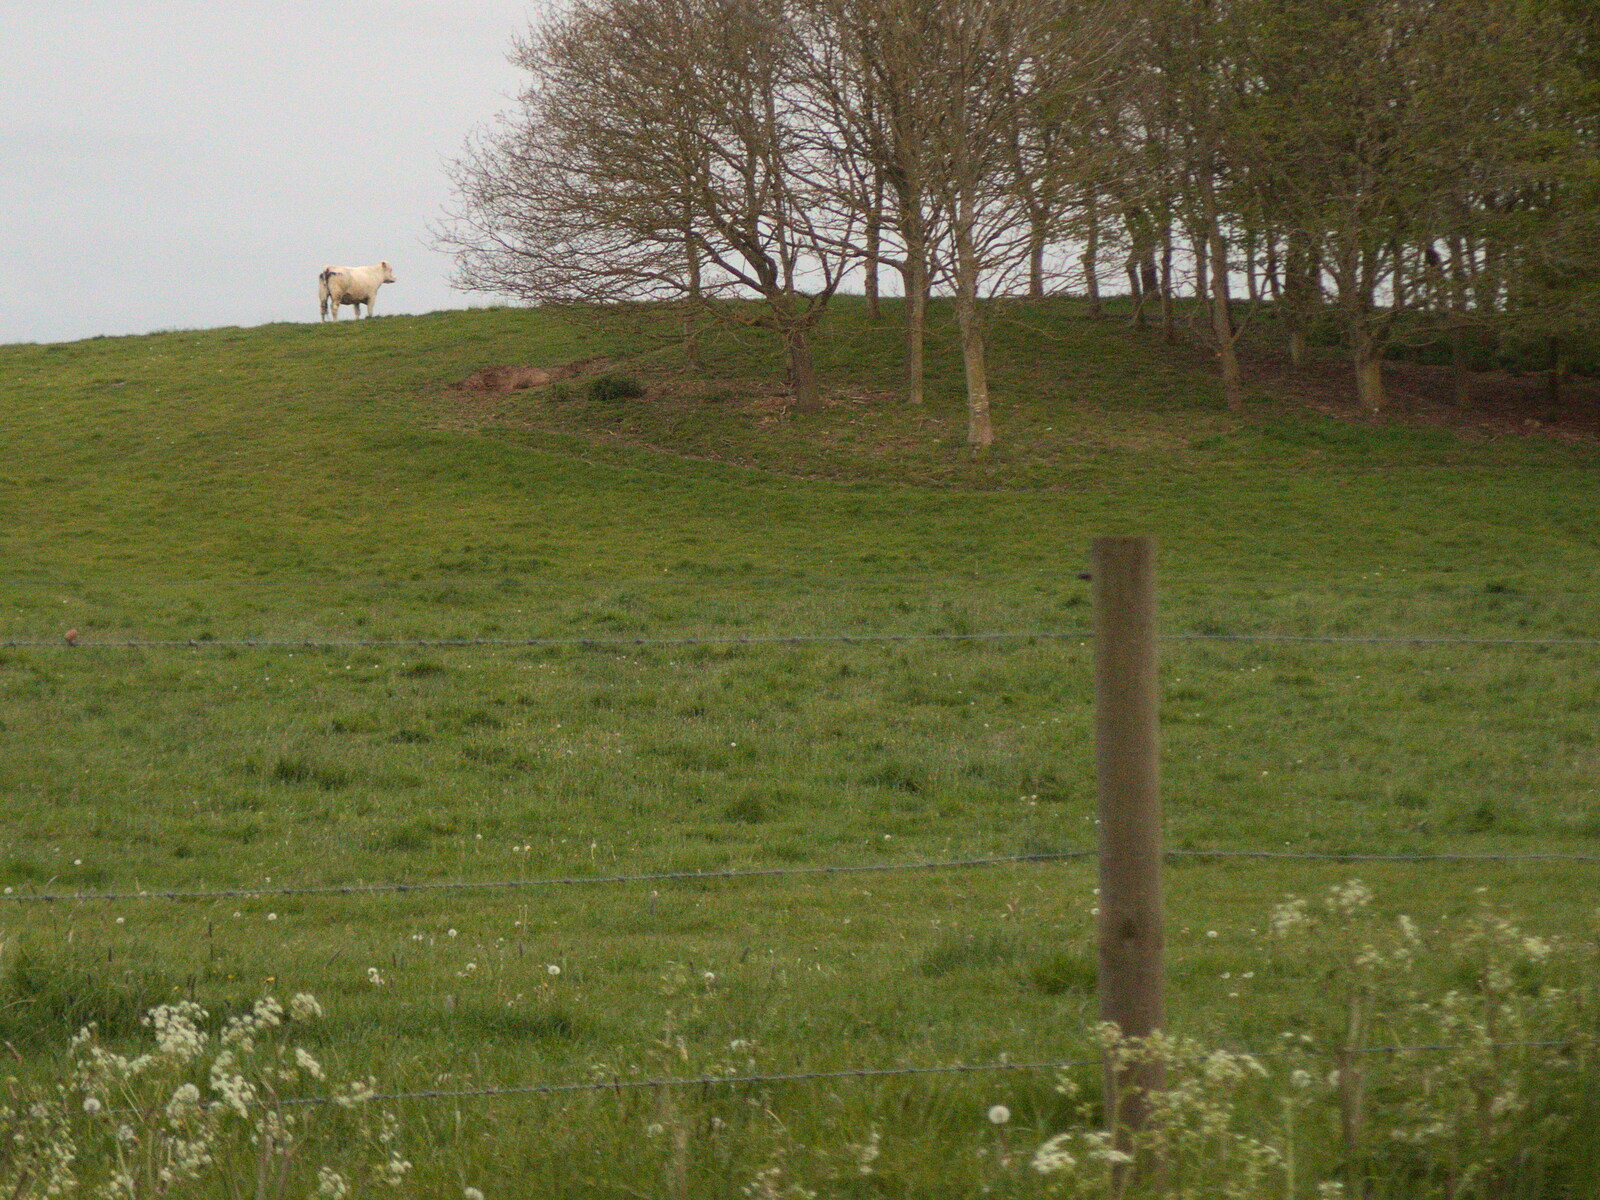 A lone cow stands on a hill from The BSCC at the King's Head, Brockdish, Norfolk - 13th May 2021